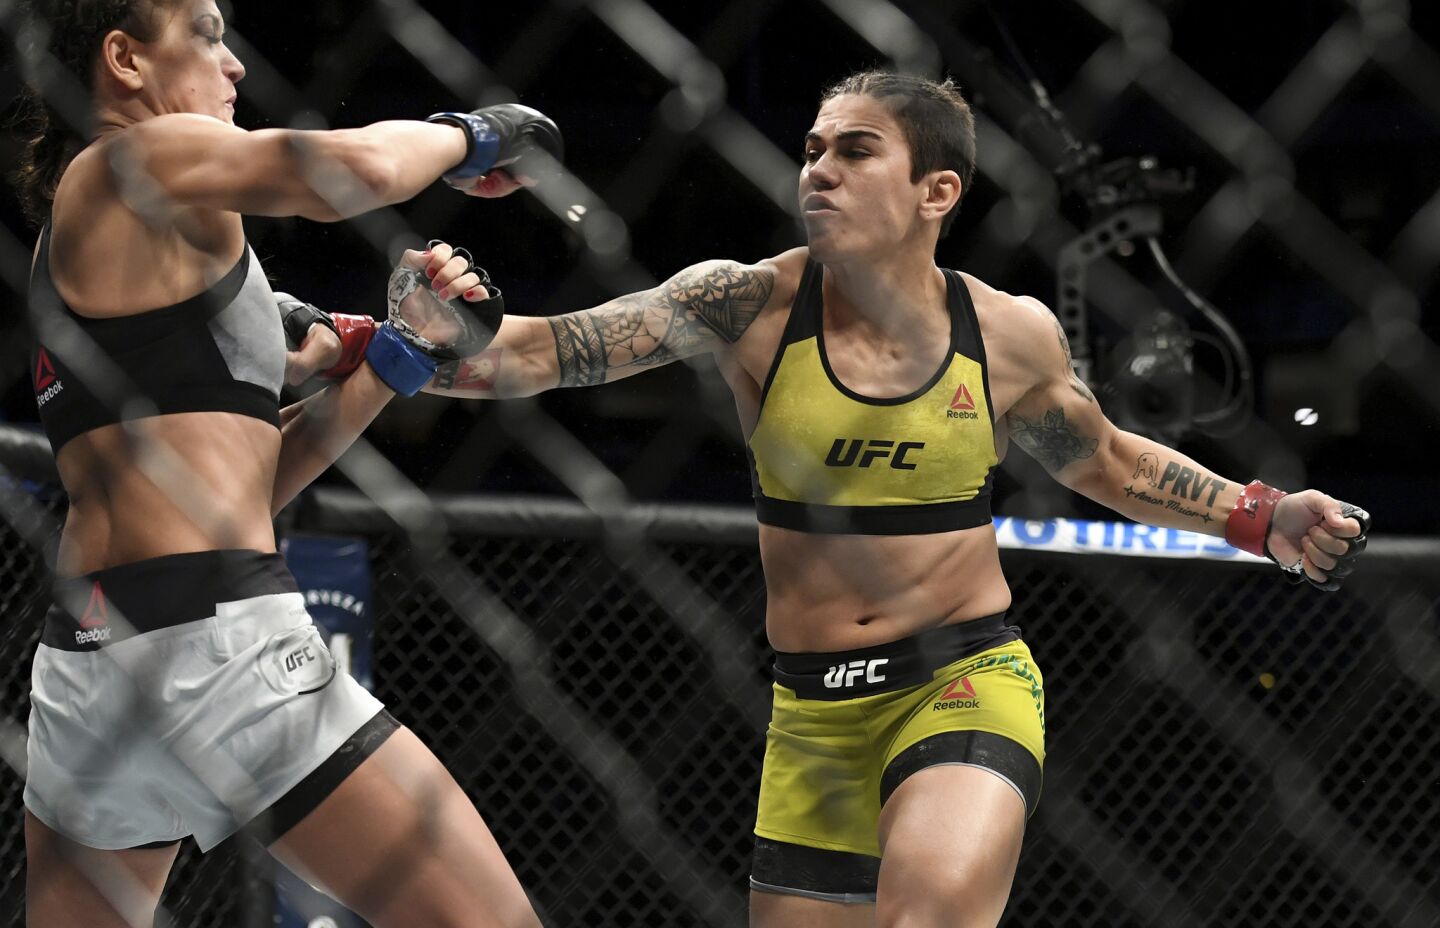 Jessica Andrade, right, winds up to punch Karolina Kowalkiewicz during their strawweight title mixed martial arts bout at UFC 228 on Saturday, Sept. 8, 2018, in Dallas. (AP Photo/Jeffrey McWhorter)